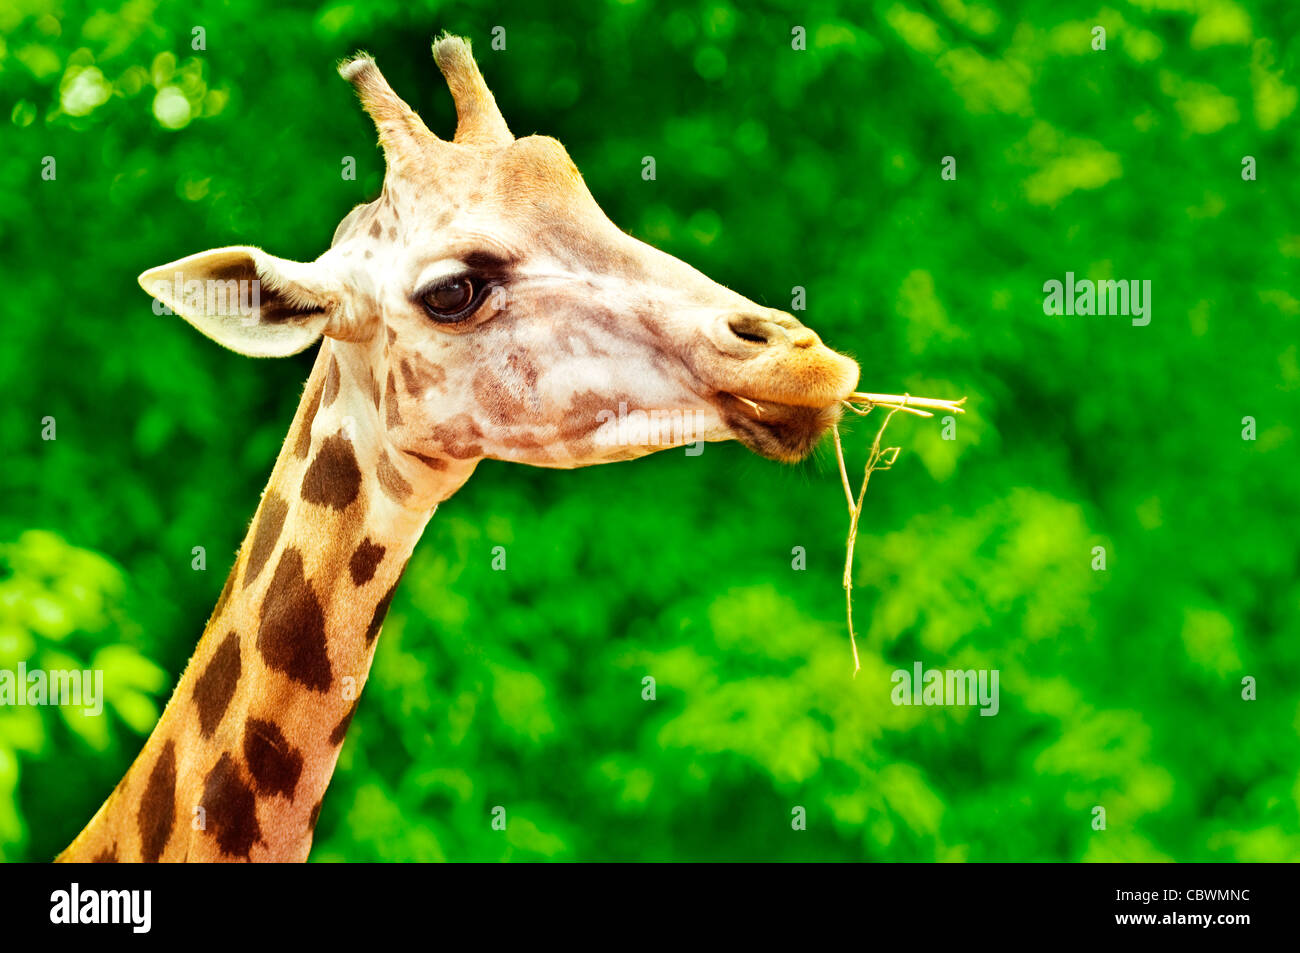 Giraffe eating twig, forest background Stock Photo